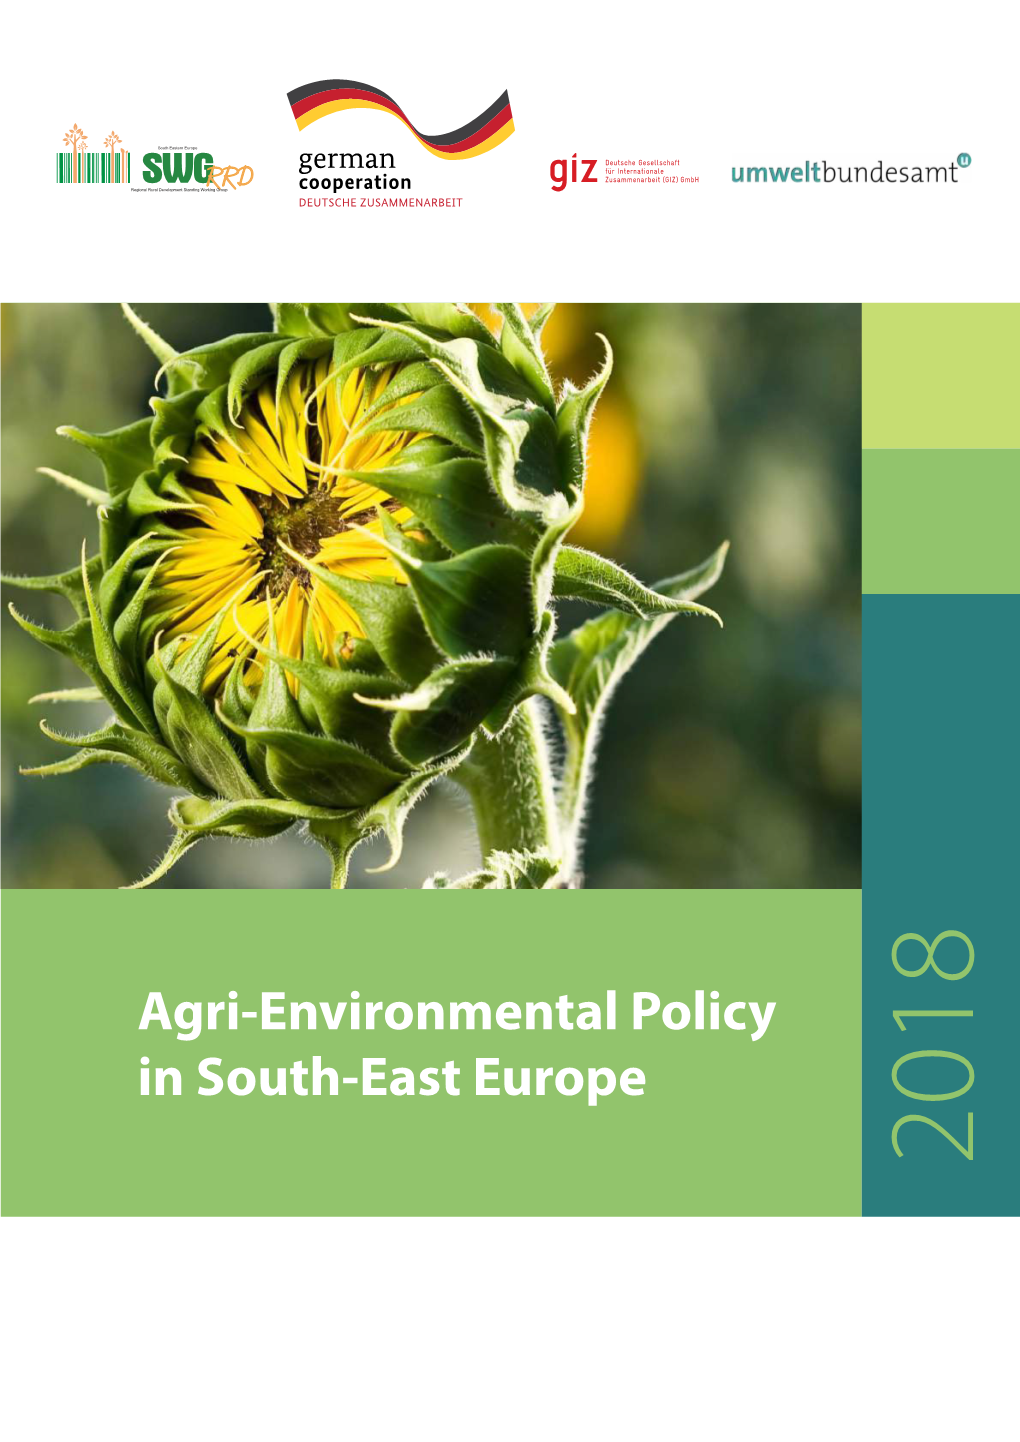 Agri-Environmental Policy in South-East Europe 2018 Regional Rural Development Standing Working Group in SEE (SWG) Blvd